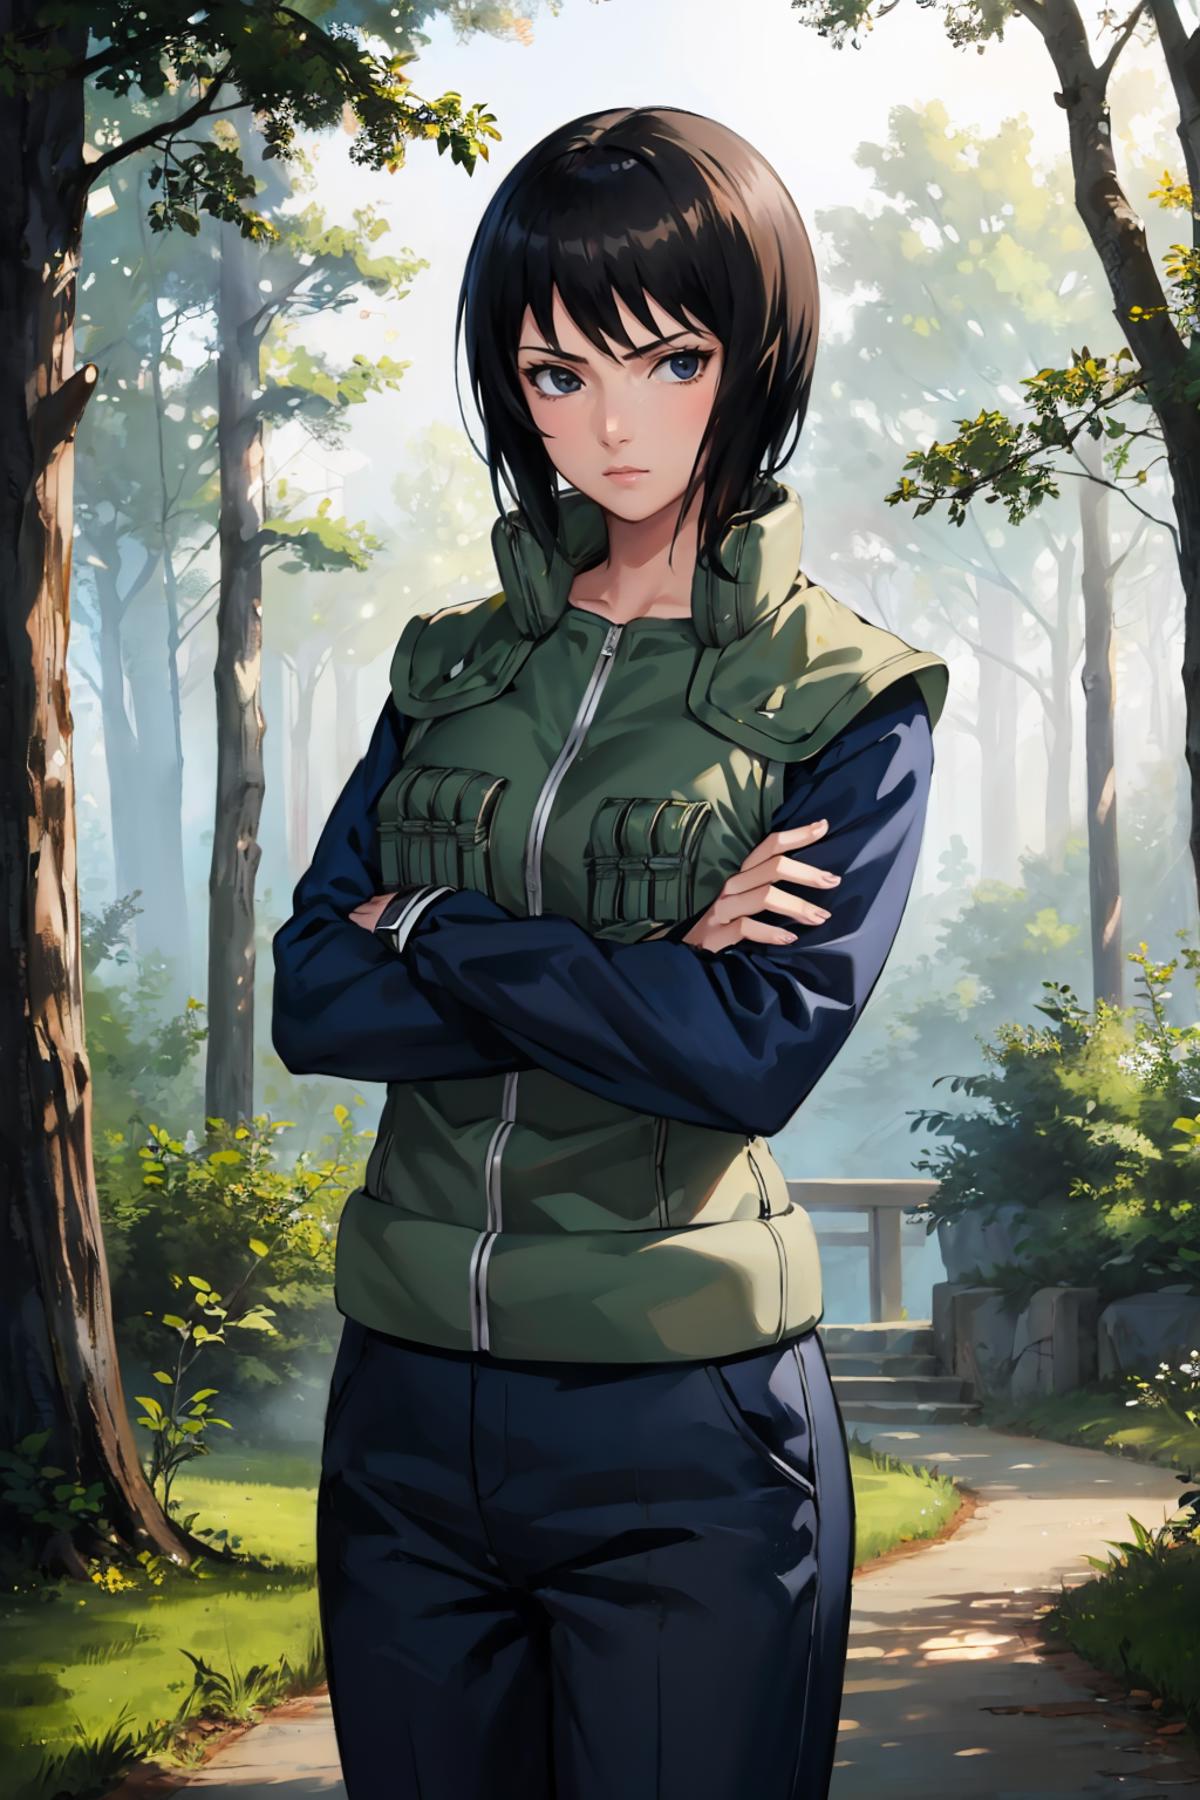 A character in a green jacket and blue jeans stands in a forest.